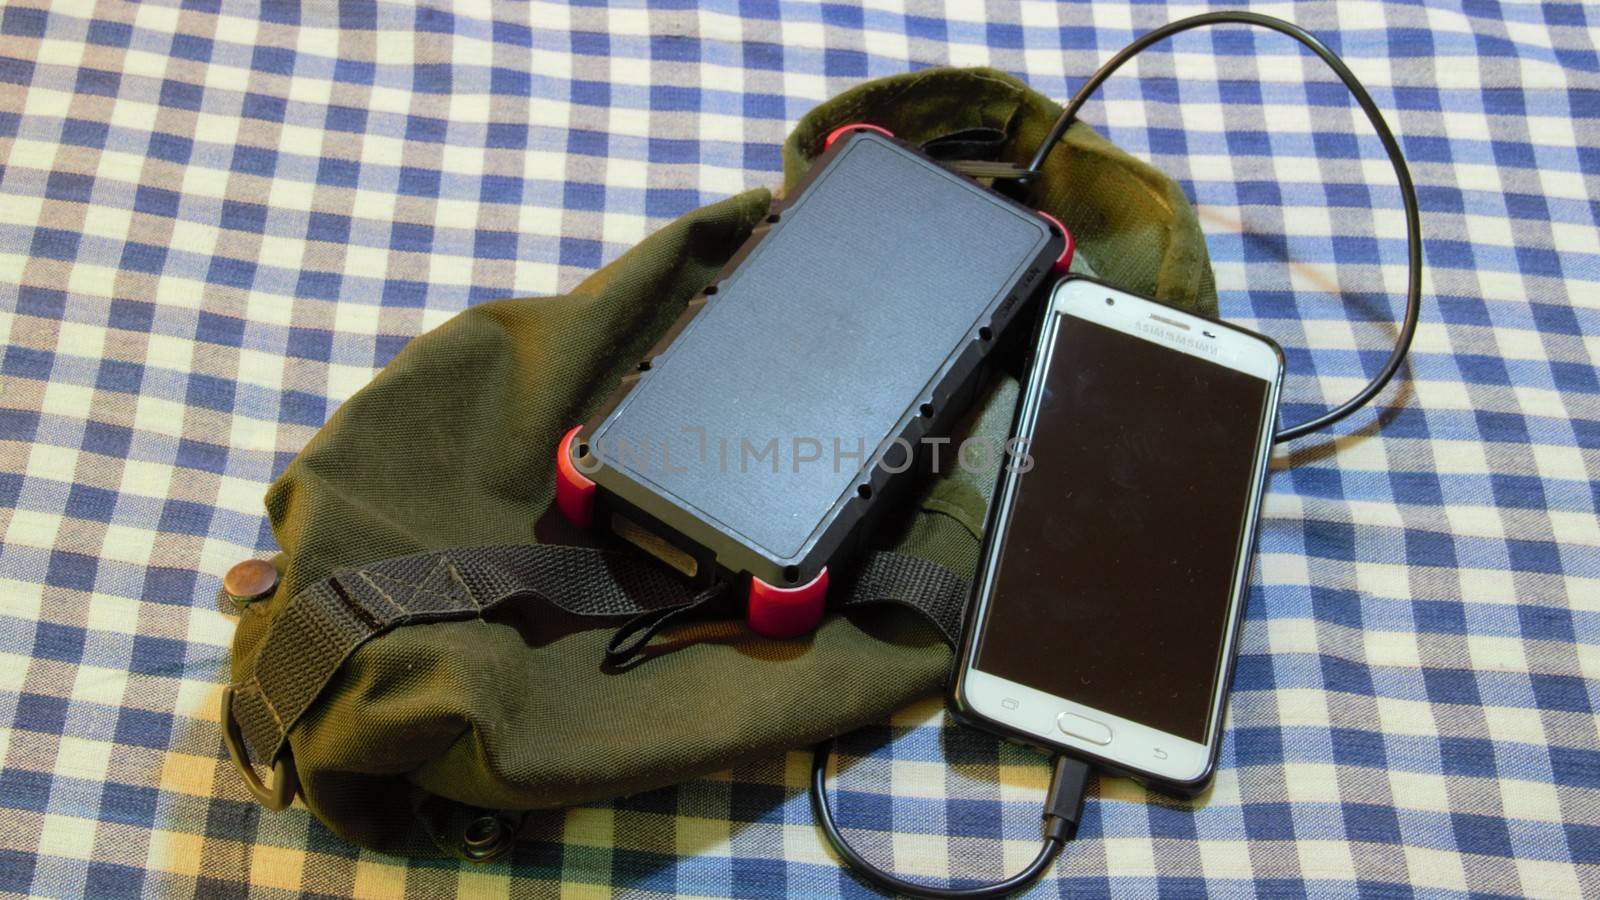 cell phone charging from power bank with solar panel